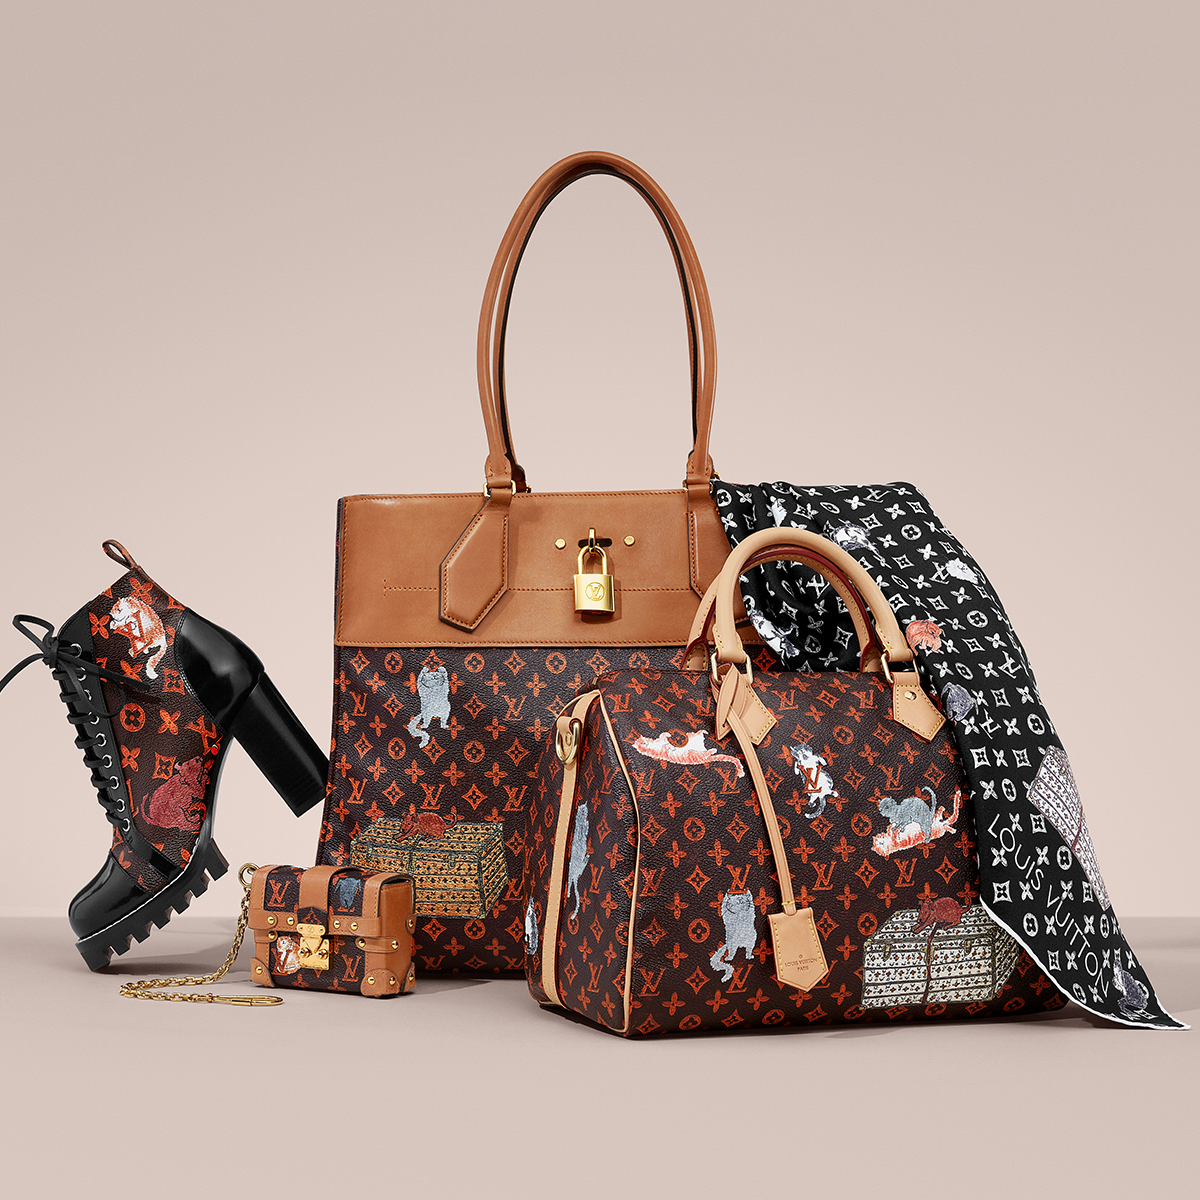 Louis Vuitton has Launched the Most Adorable Collaboration | MiNDFOOD | Style